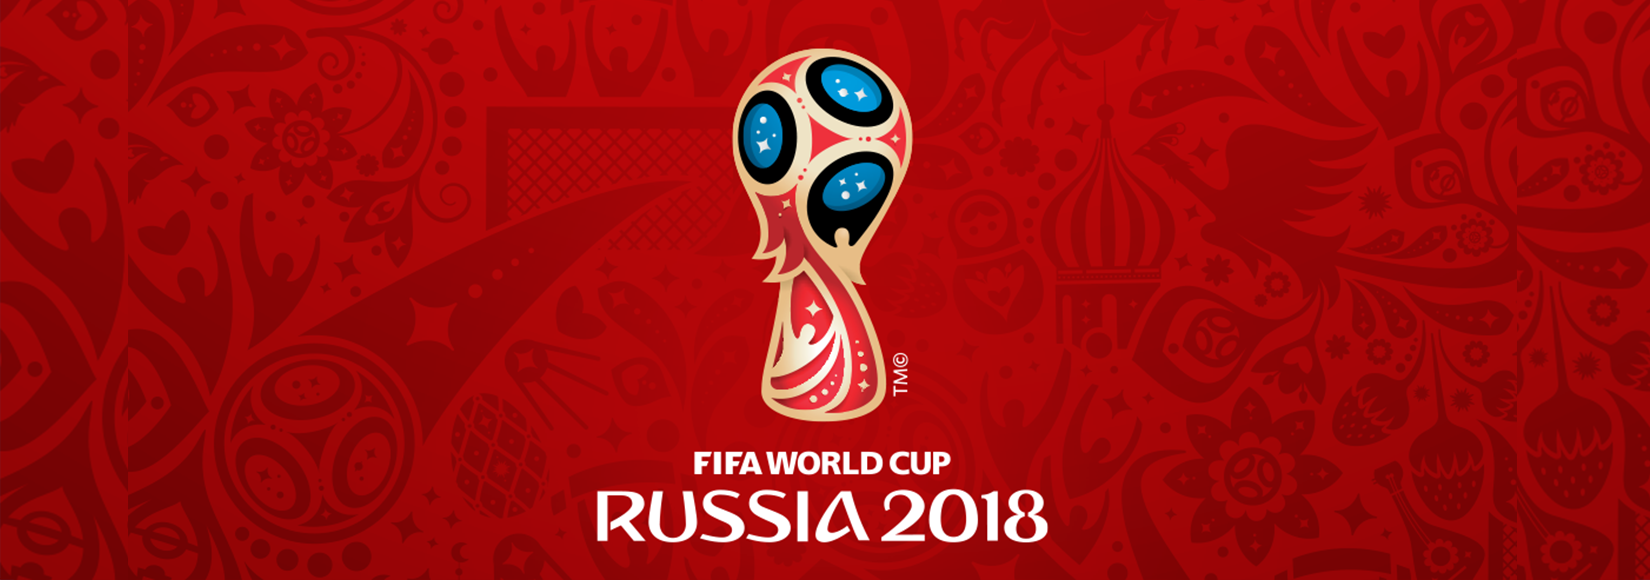 logo 2018 FIFA World Cup Russia banner 1650x580.png